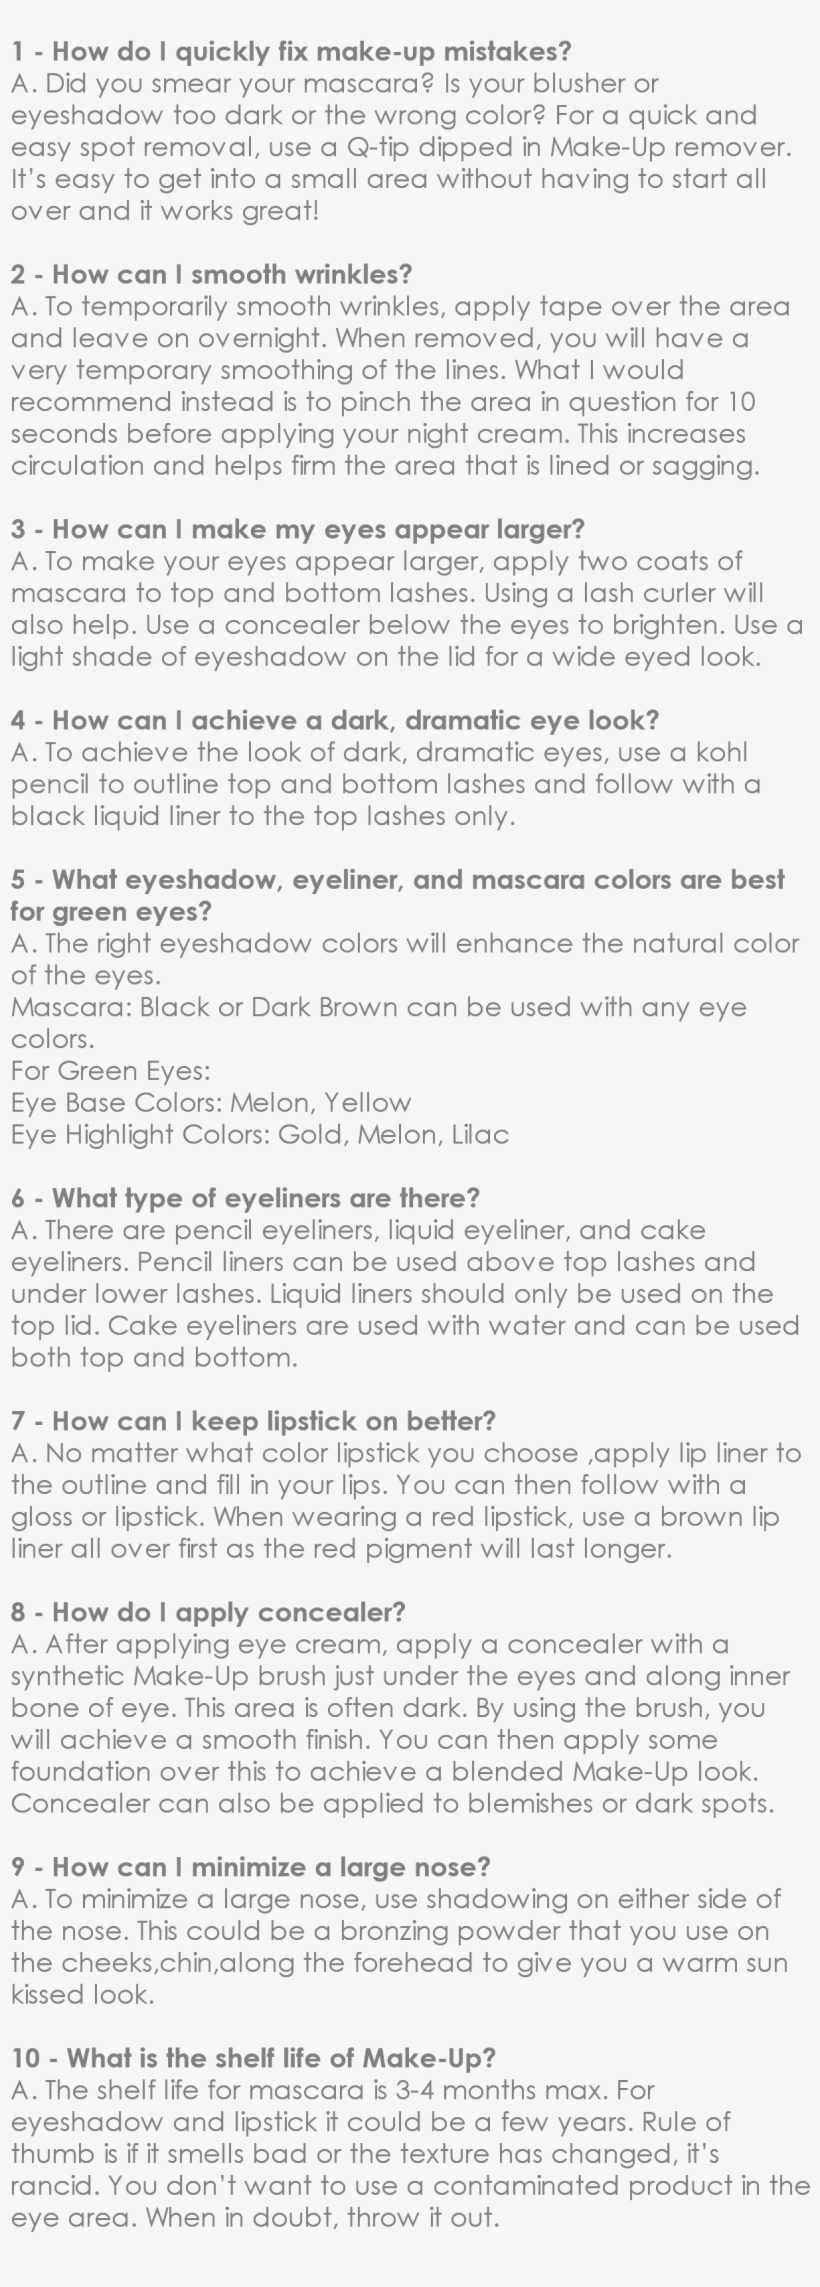 How Do I Quickly Fix Make-up Mistakes A - Document, transparent png #5090031